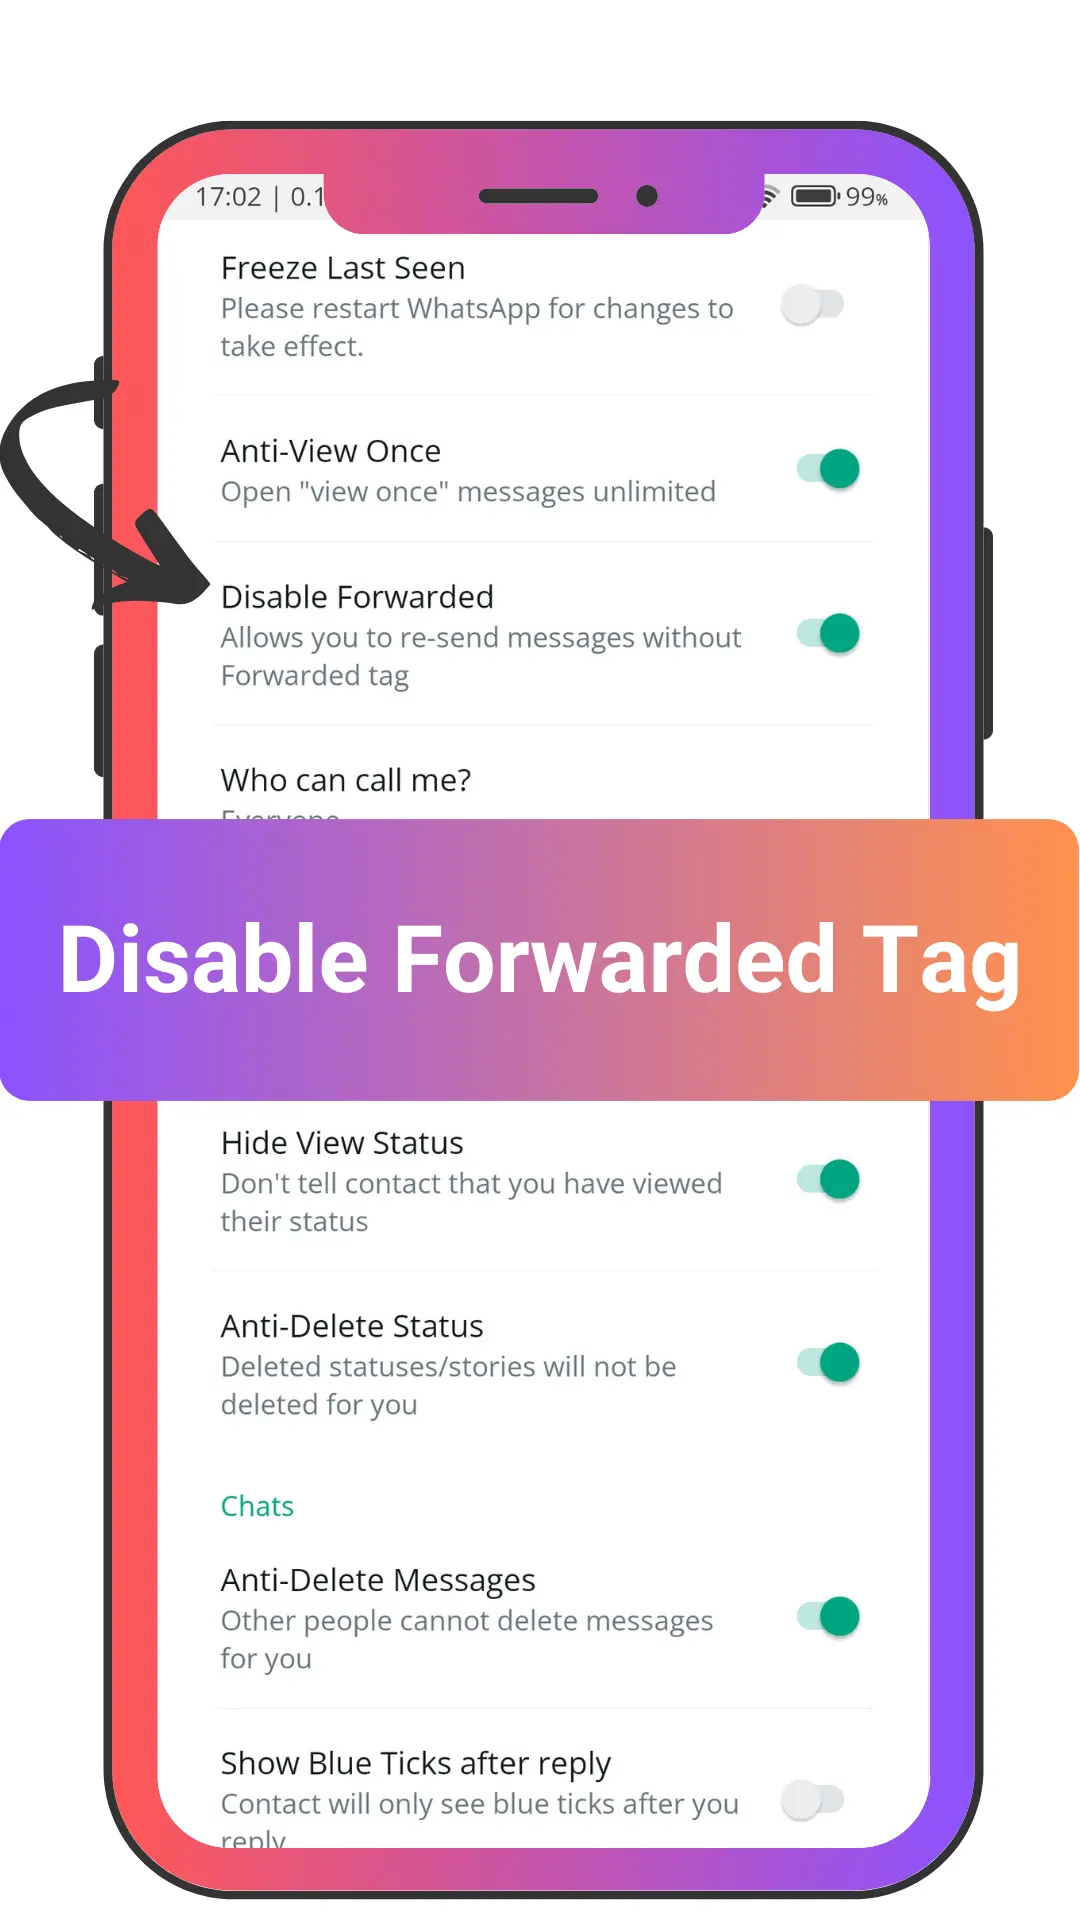 Disable Forwarded Tag